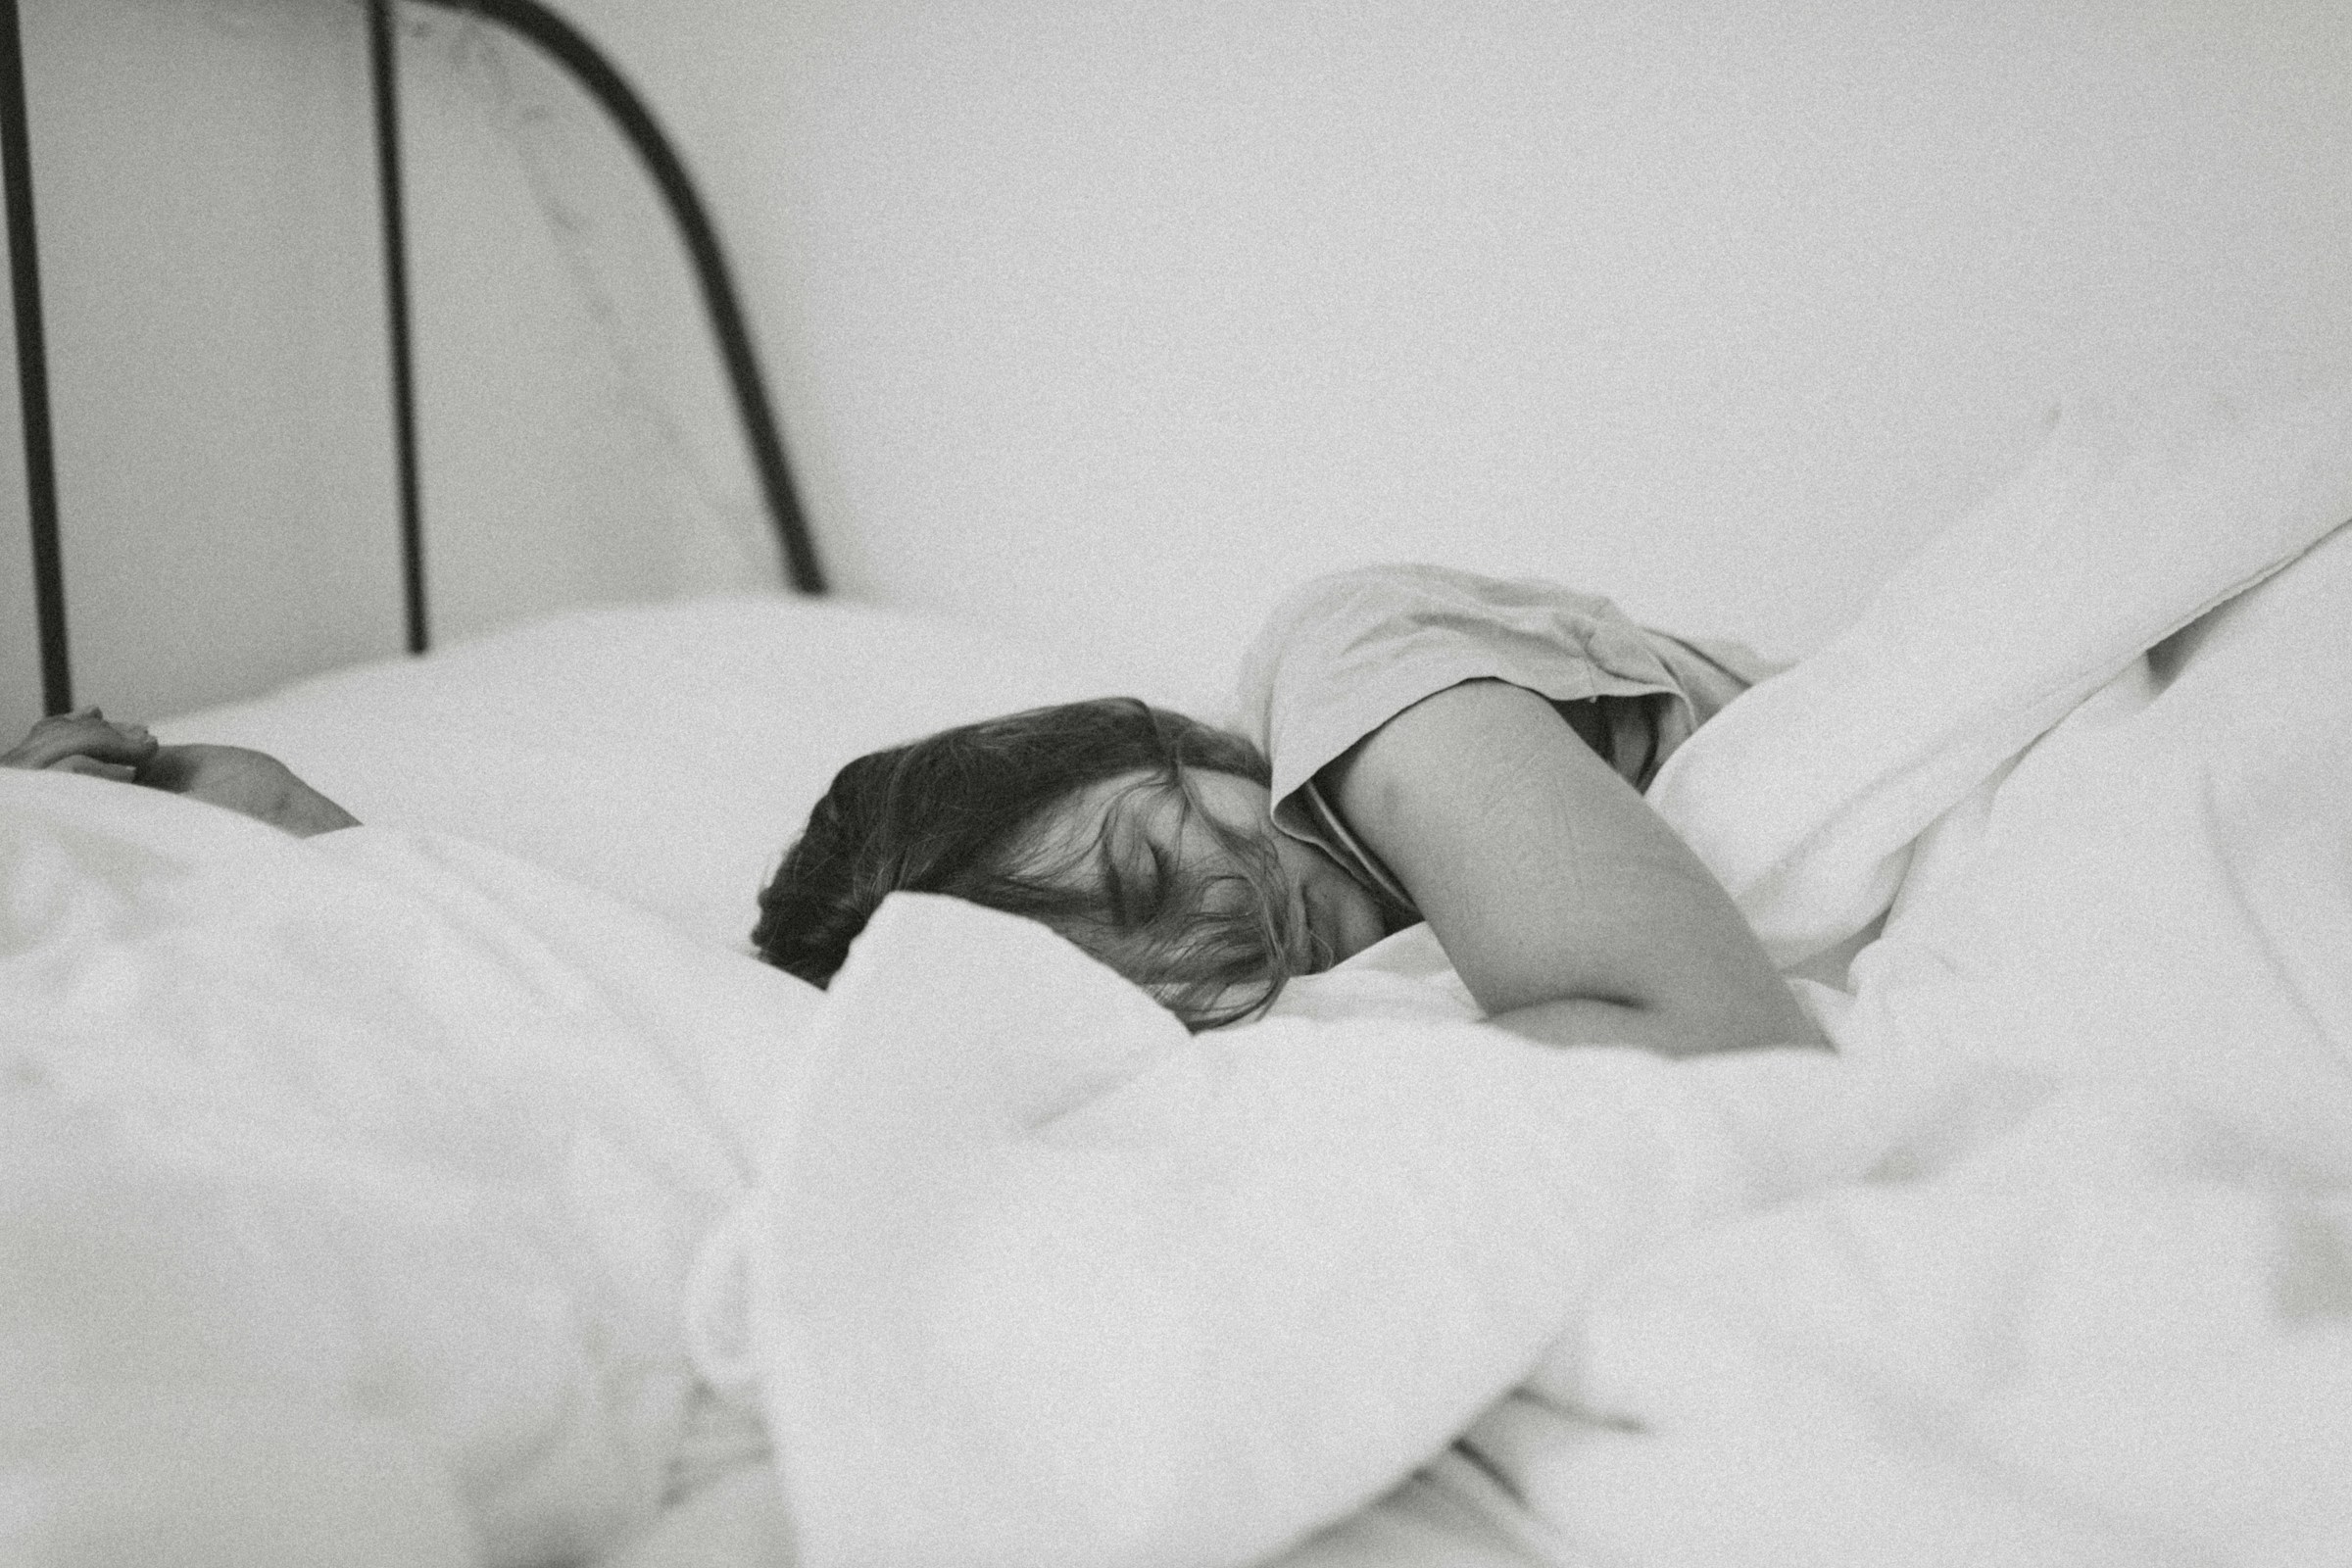 A woman asleep in bed | Source: Unsplash